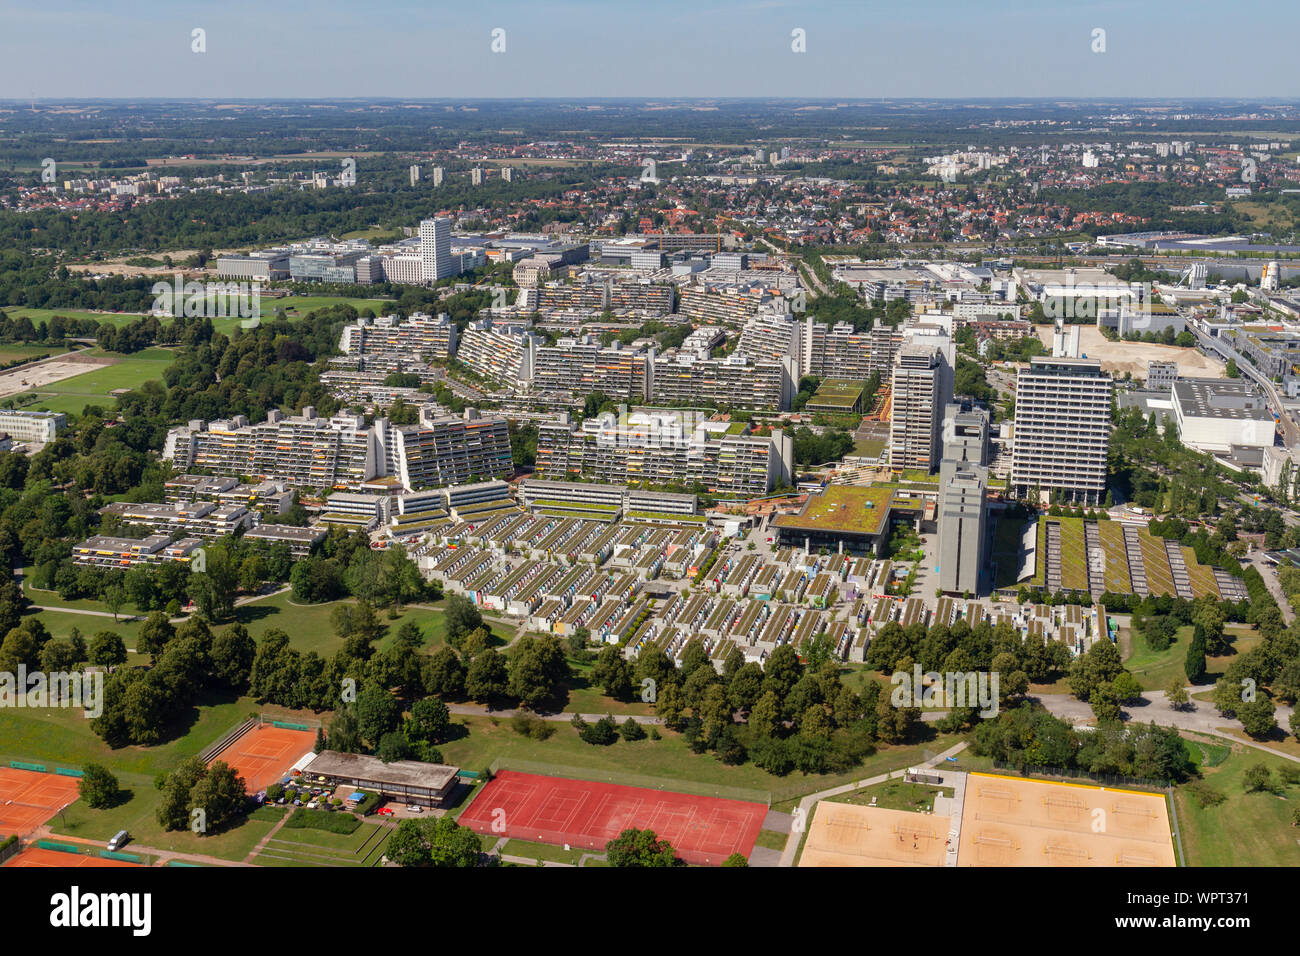 View of the 1972 Olympic Village from the Olympiaturm (Olympic Tower), Munich, Bavaria, Germany. Stock Photo